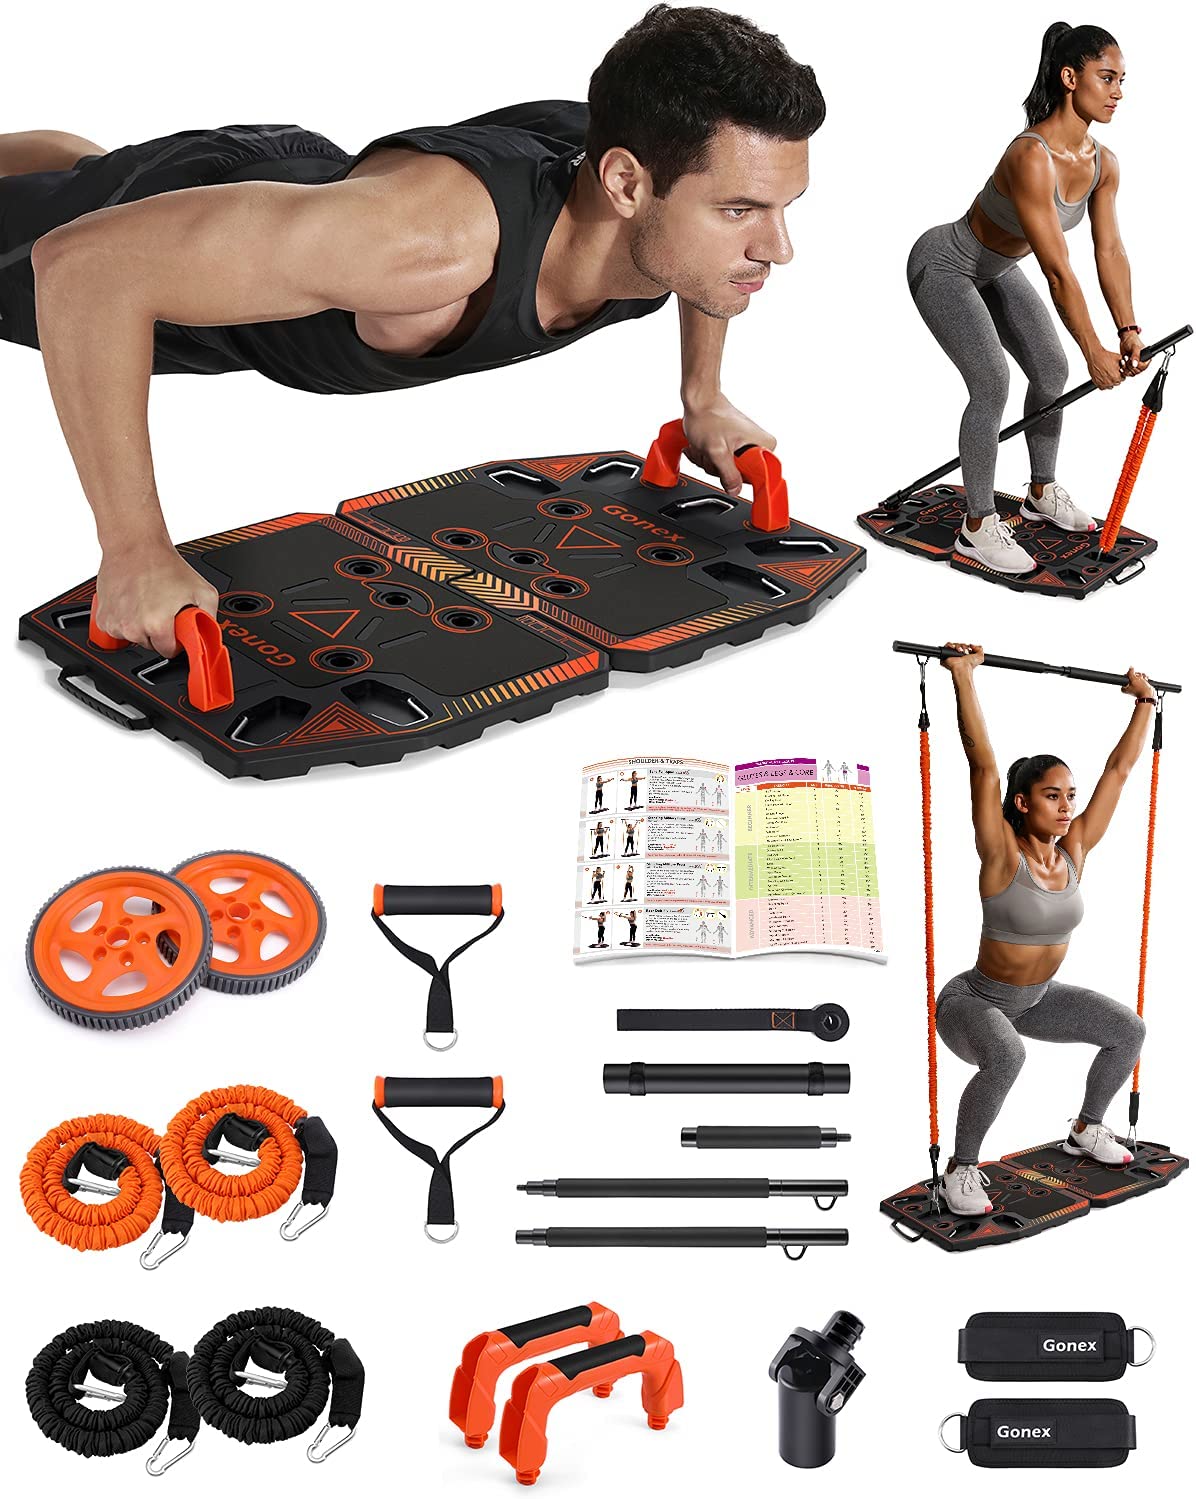 Sample home workout equipment